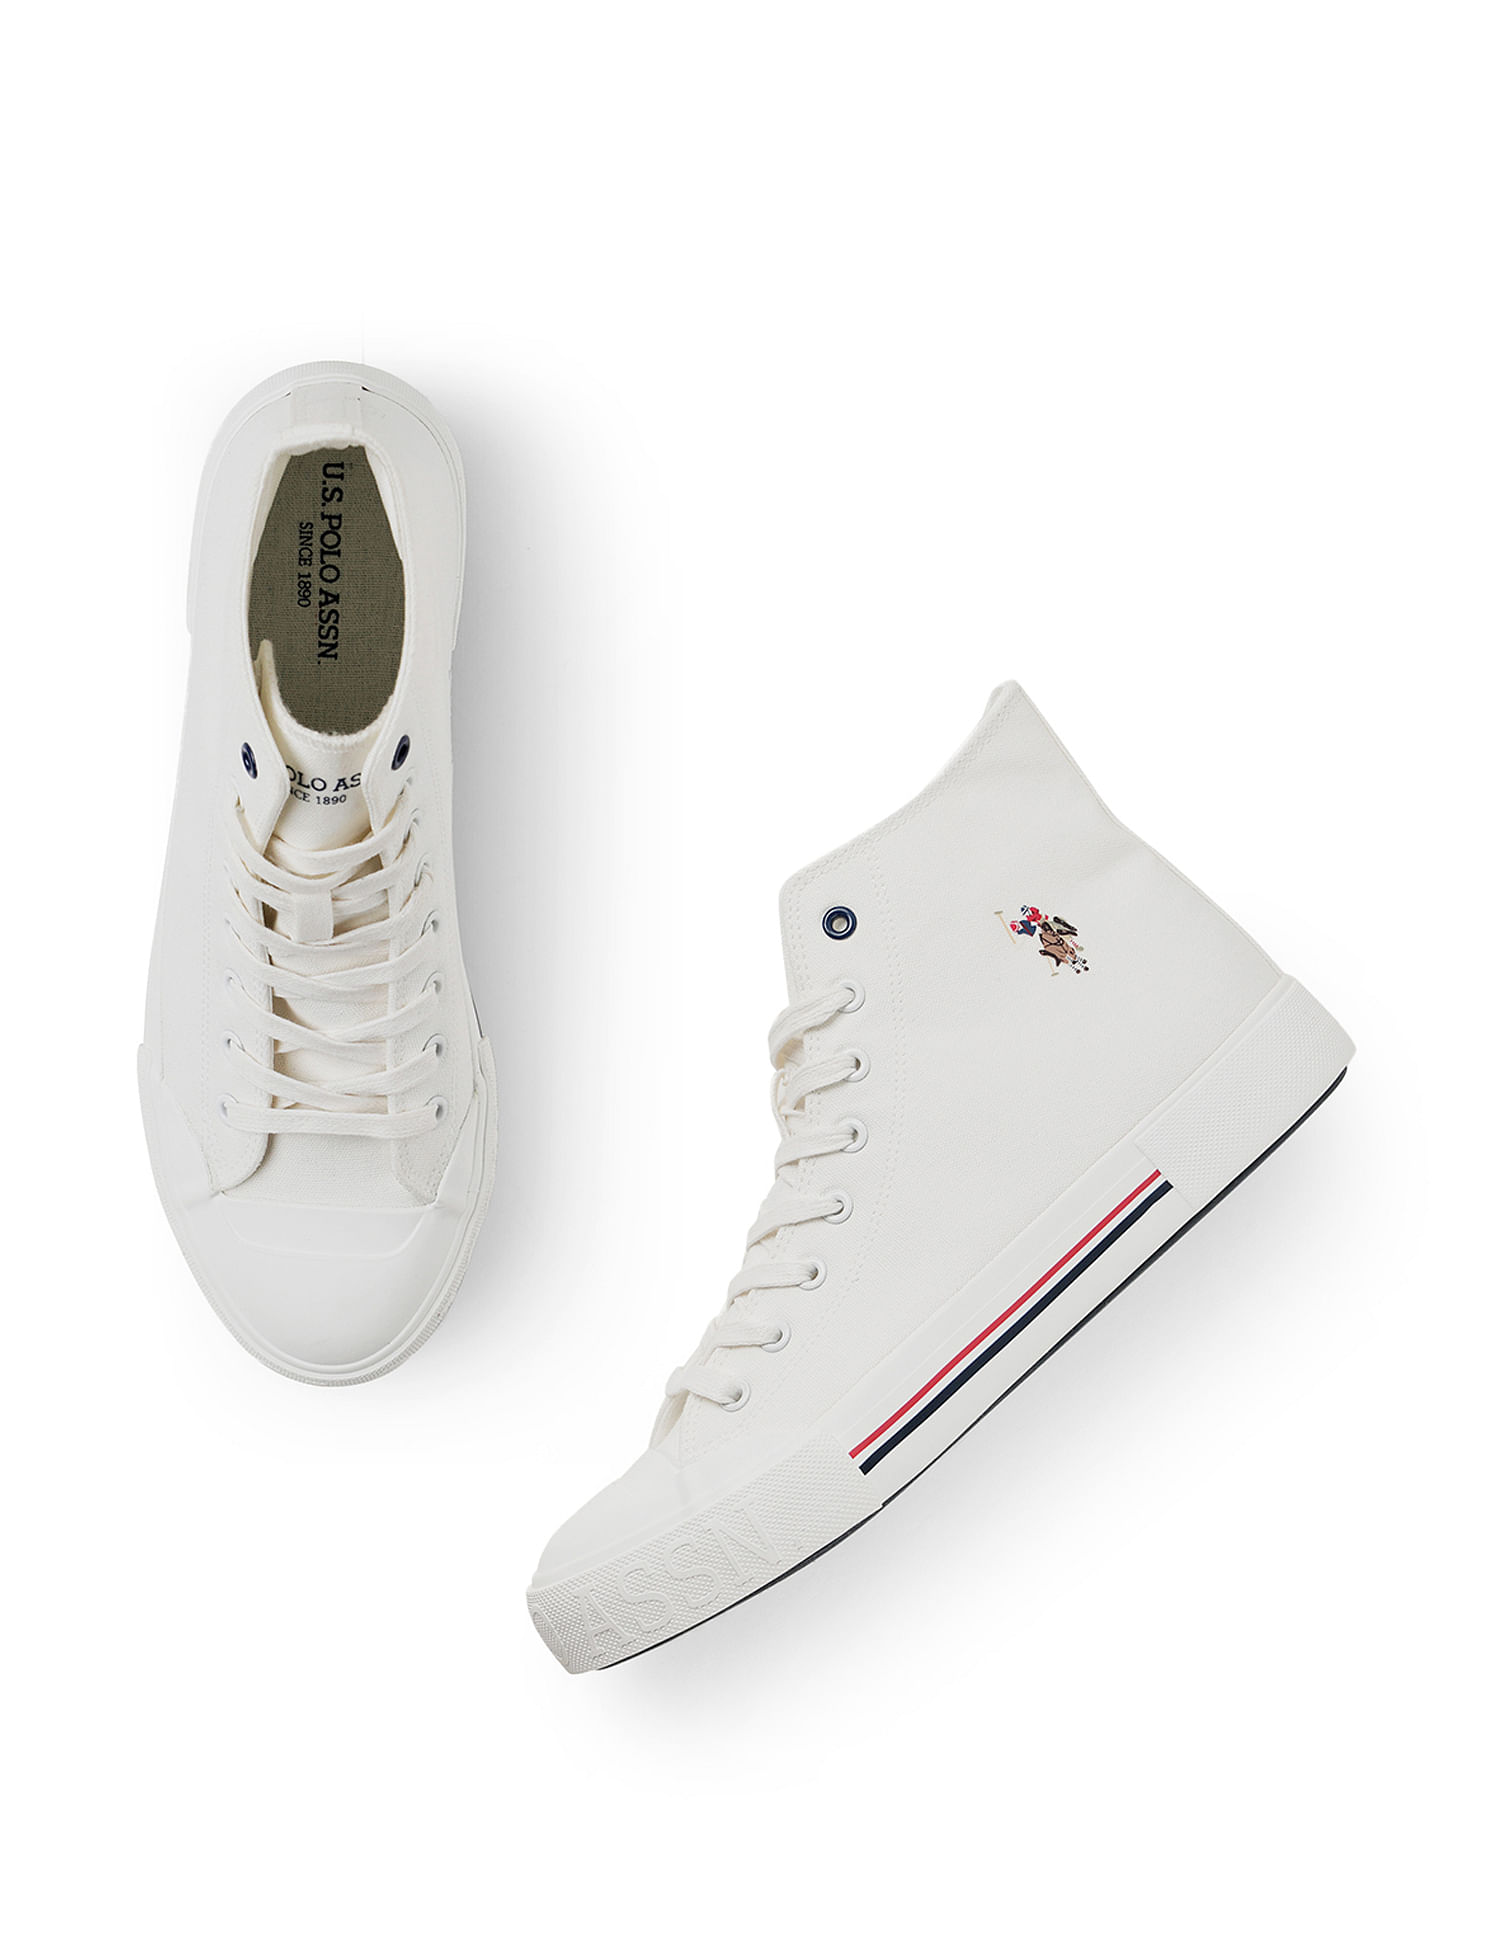 Men's High Sole Spikes Shoes Sneakers White | Martin Valen